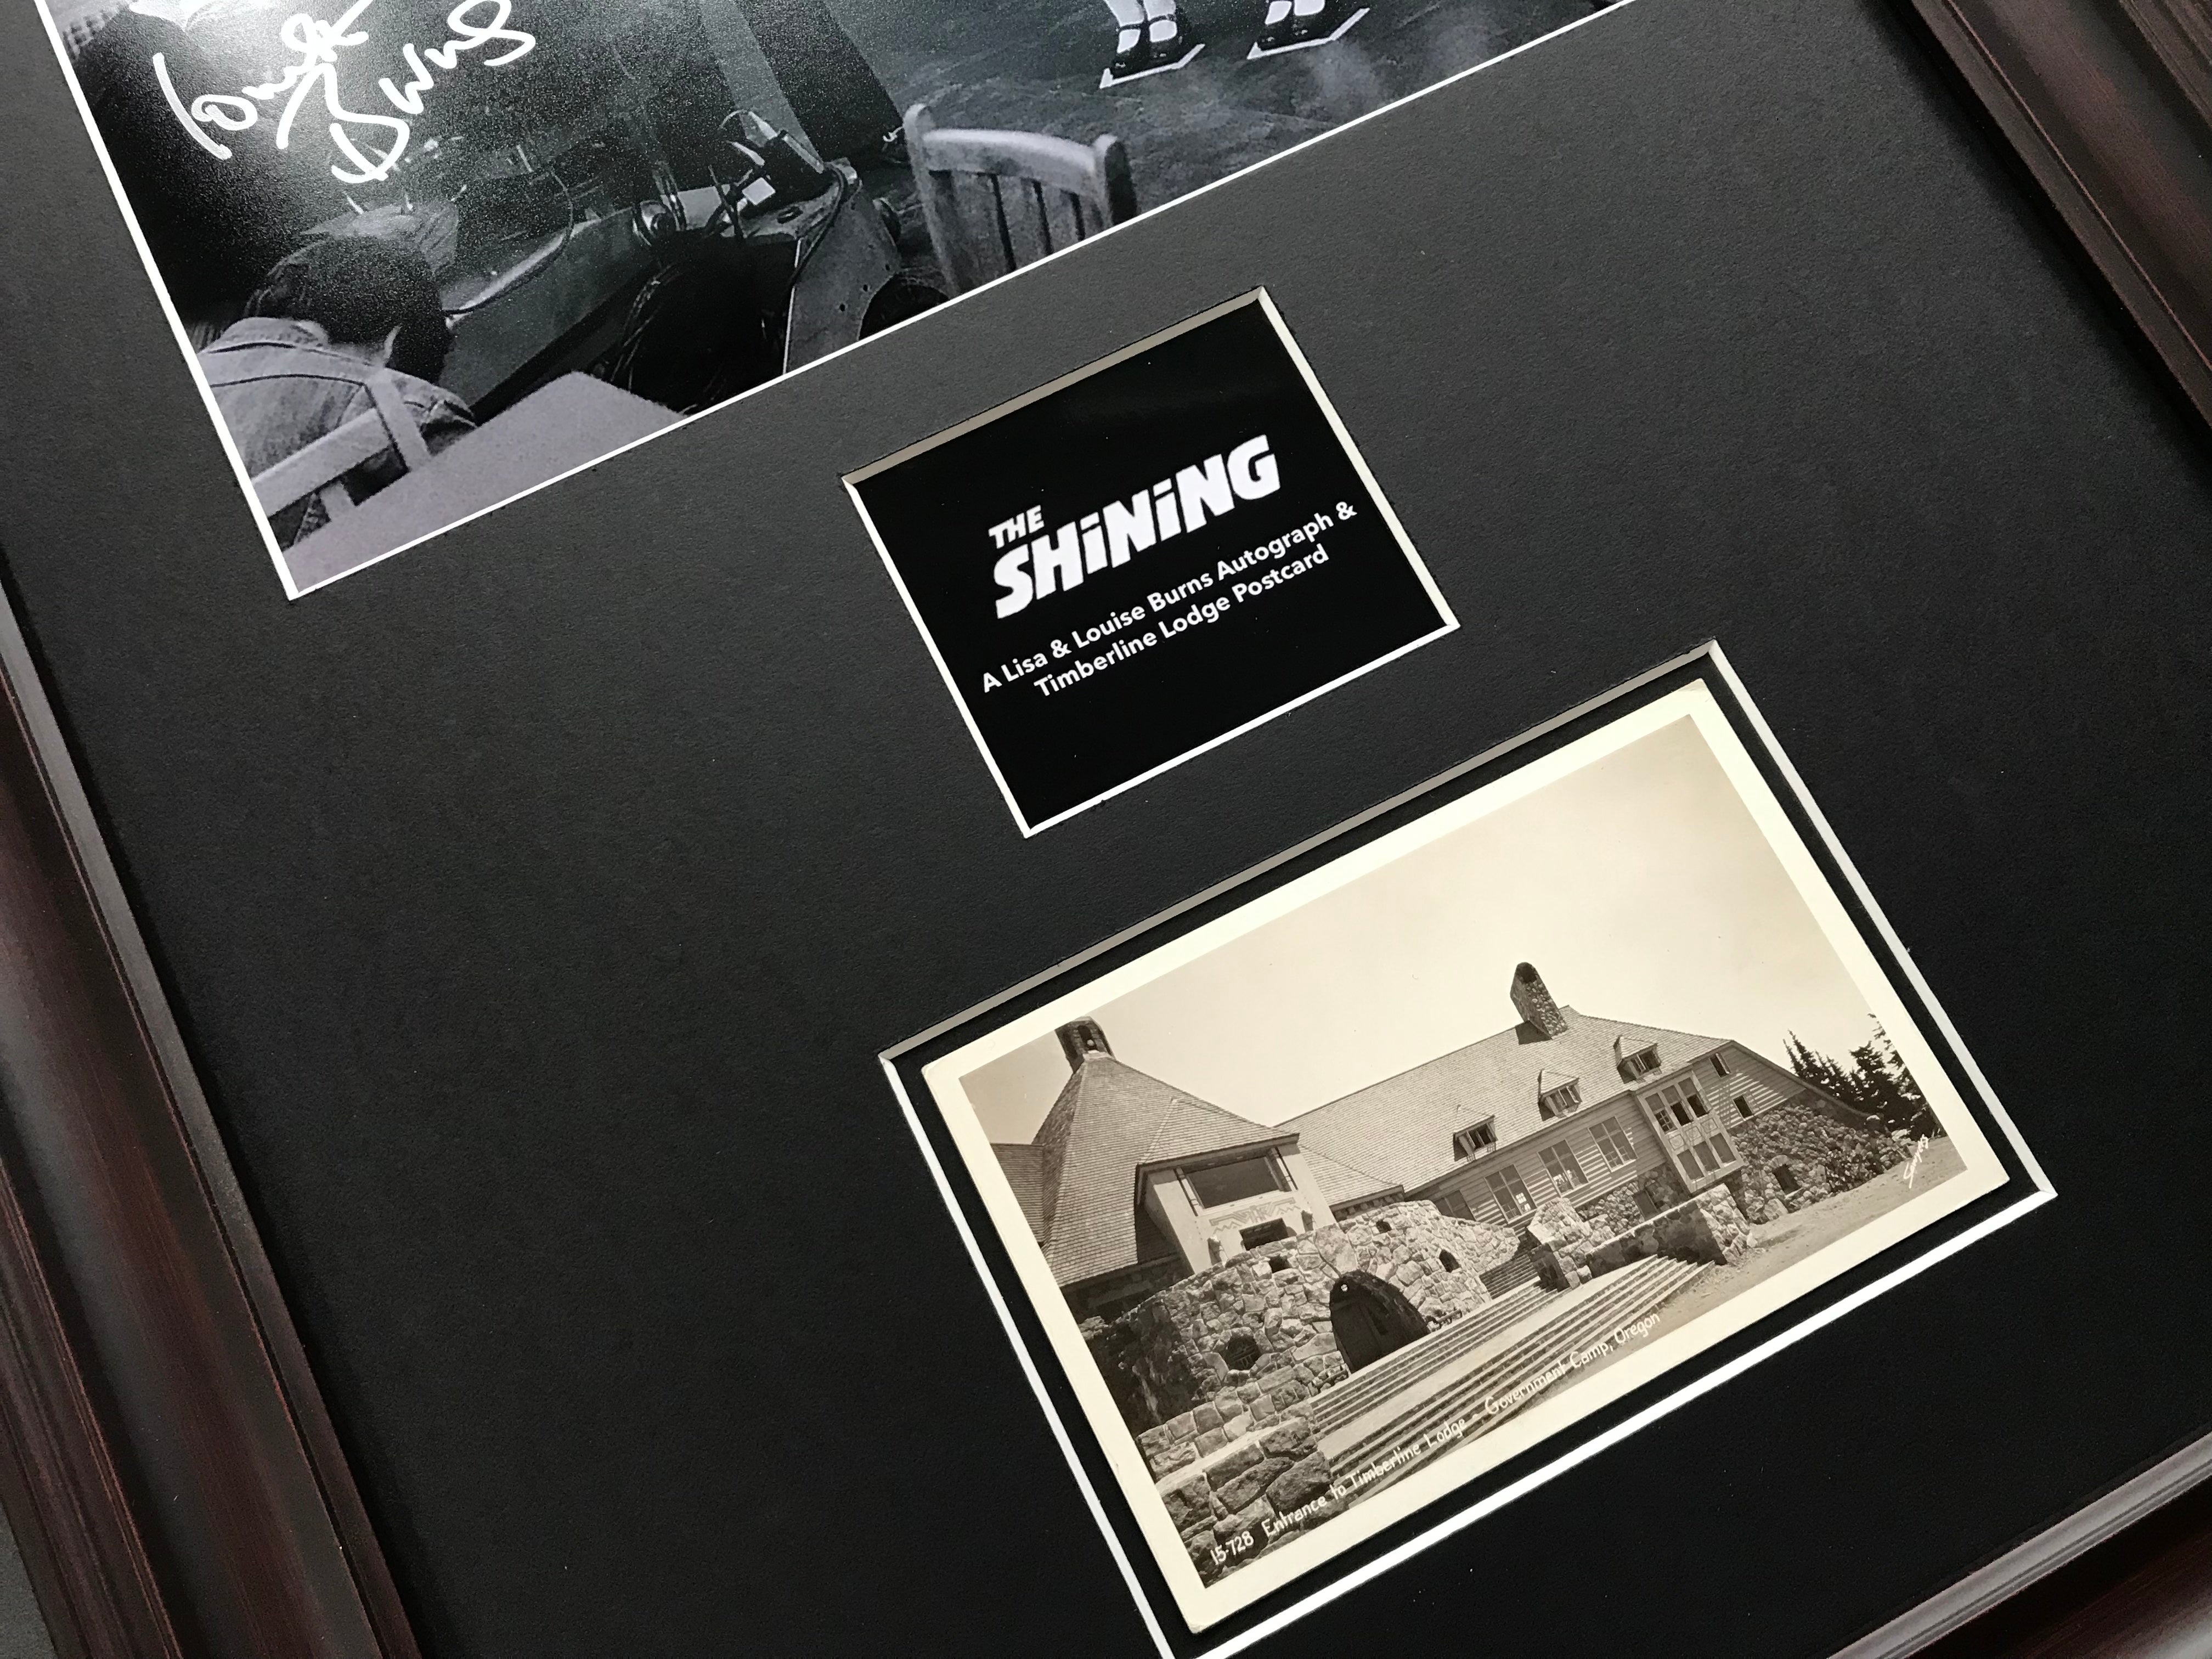 The Shining (1980) - A Framed Cast Autograph & Timberline Lodge Postcard